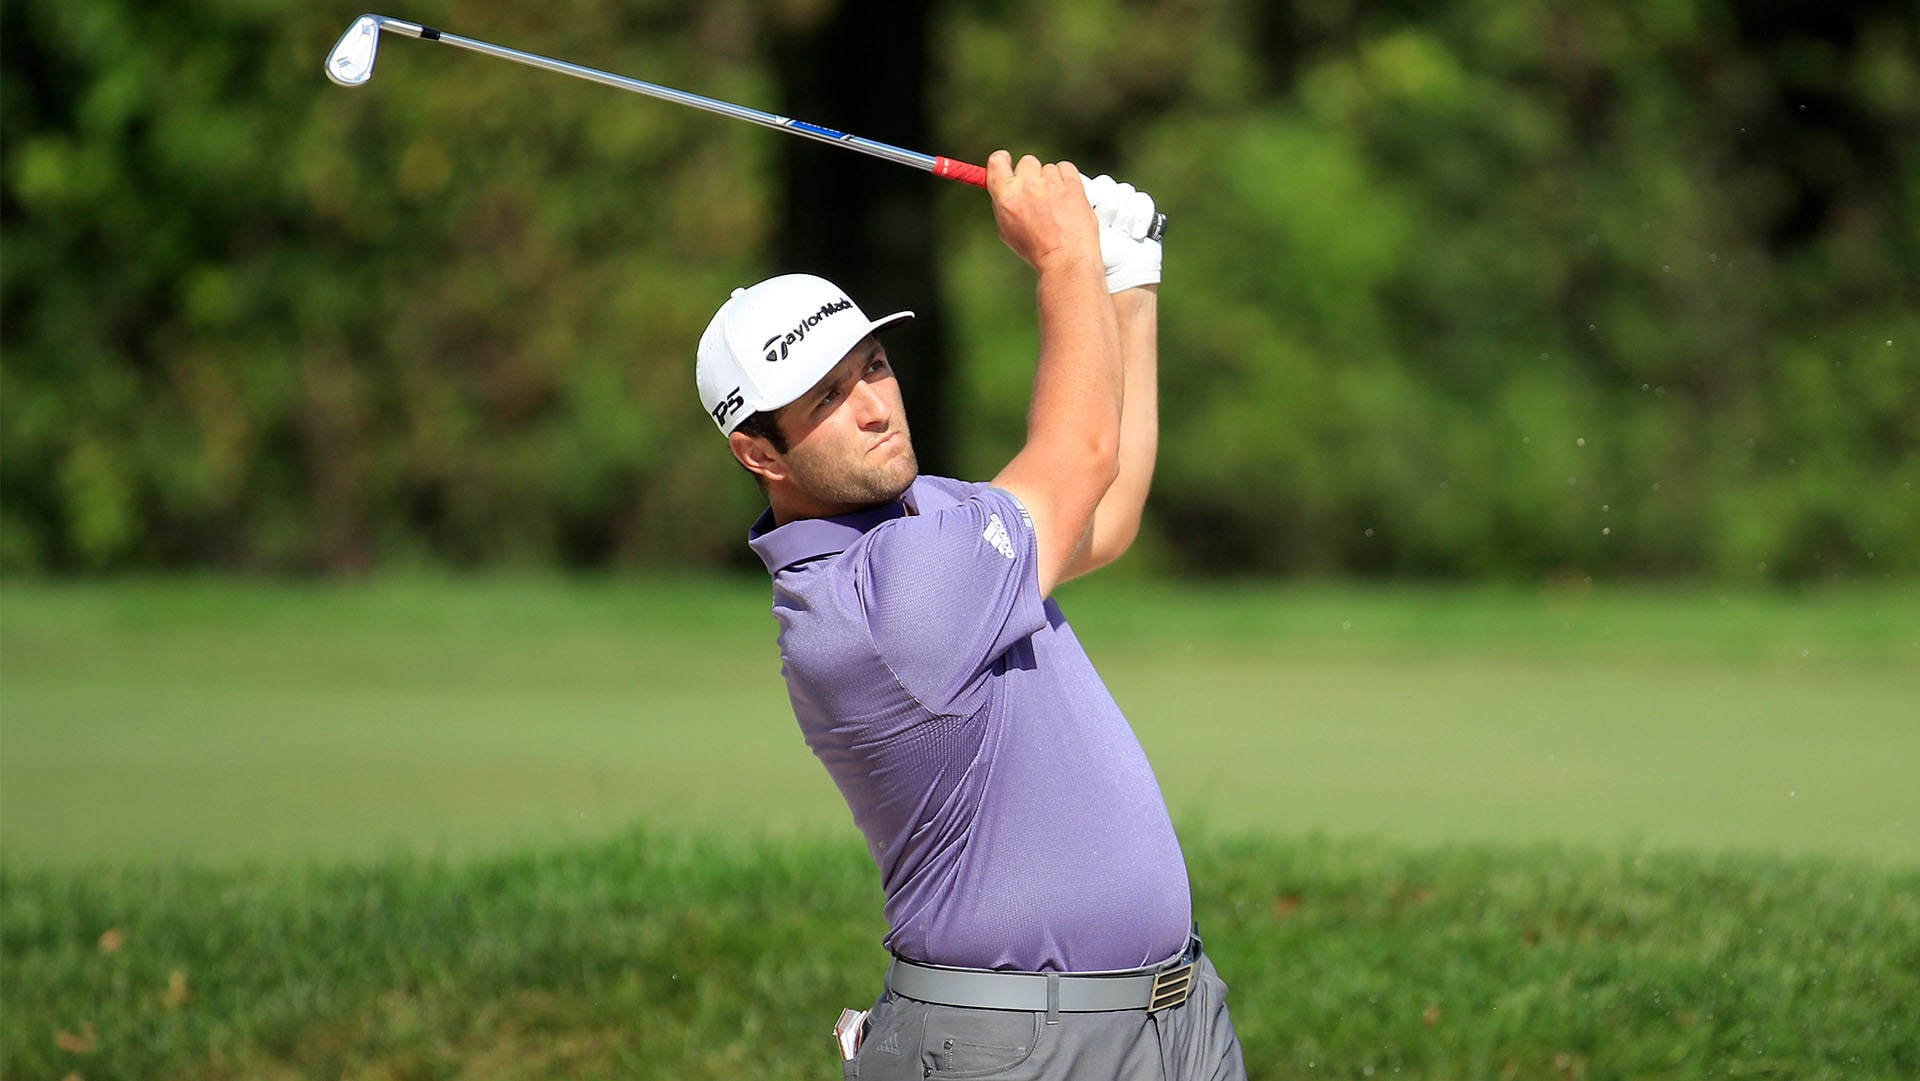 Mental lapse: Jon Rahm (66) hit with one-shot penalty for picking up his ball